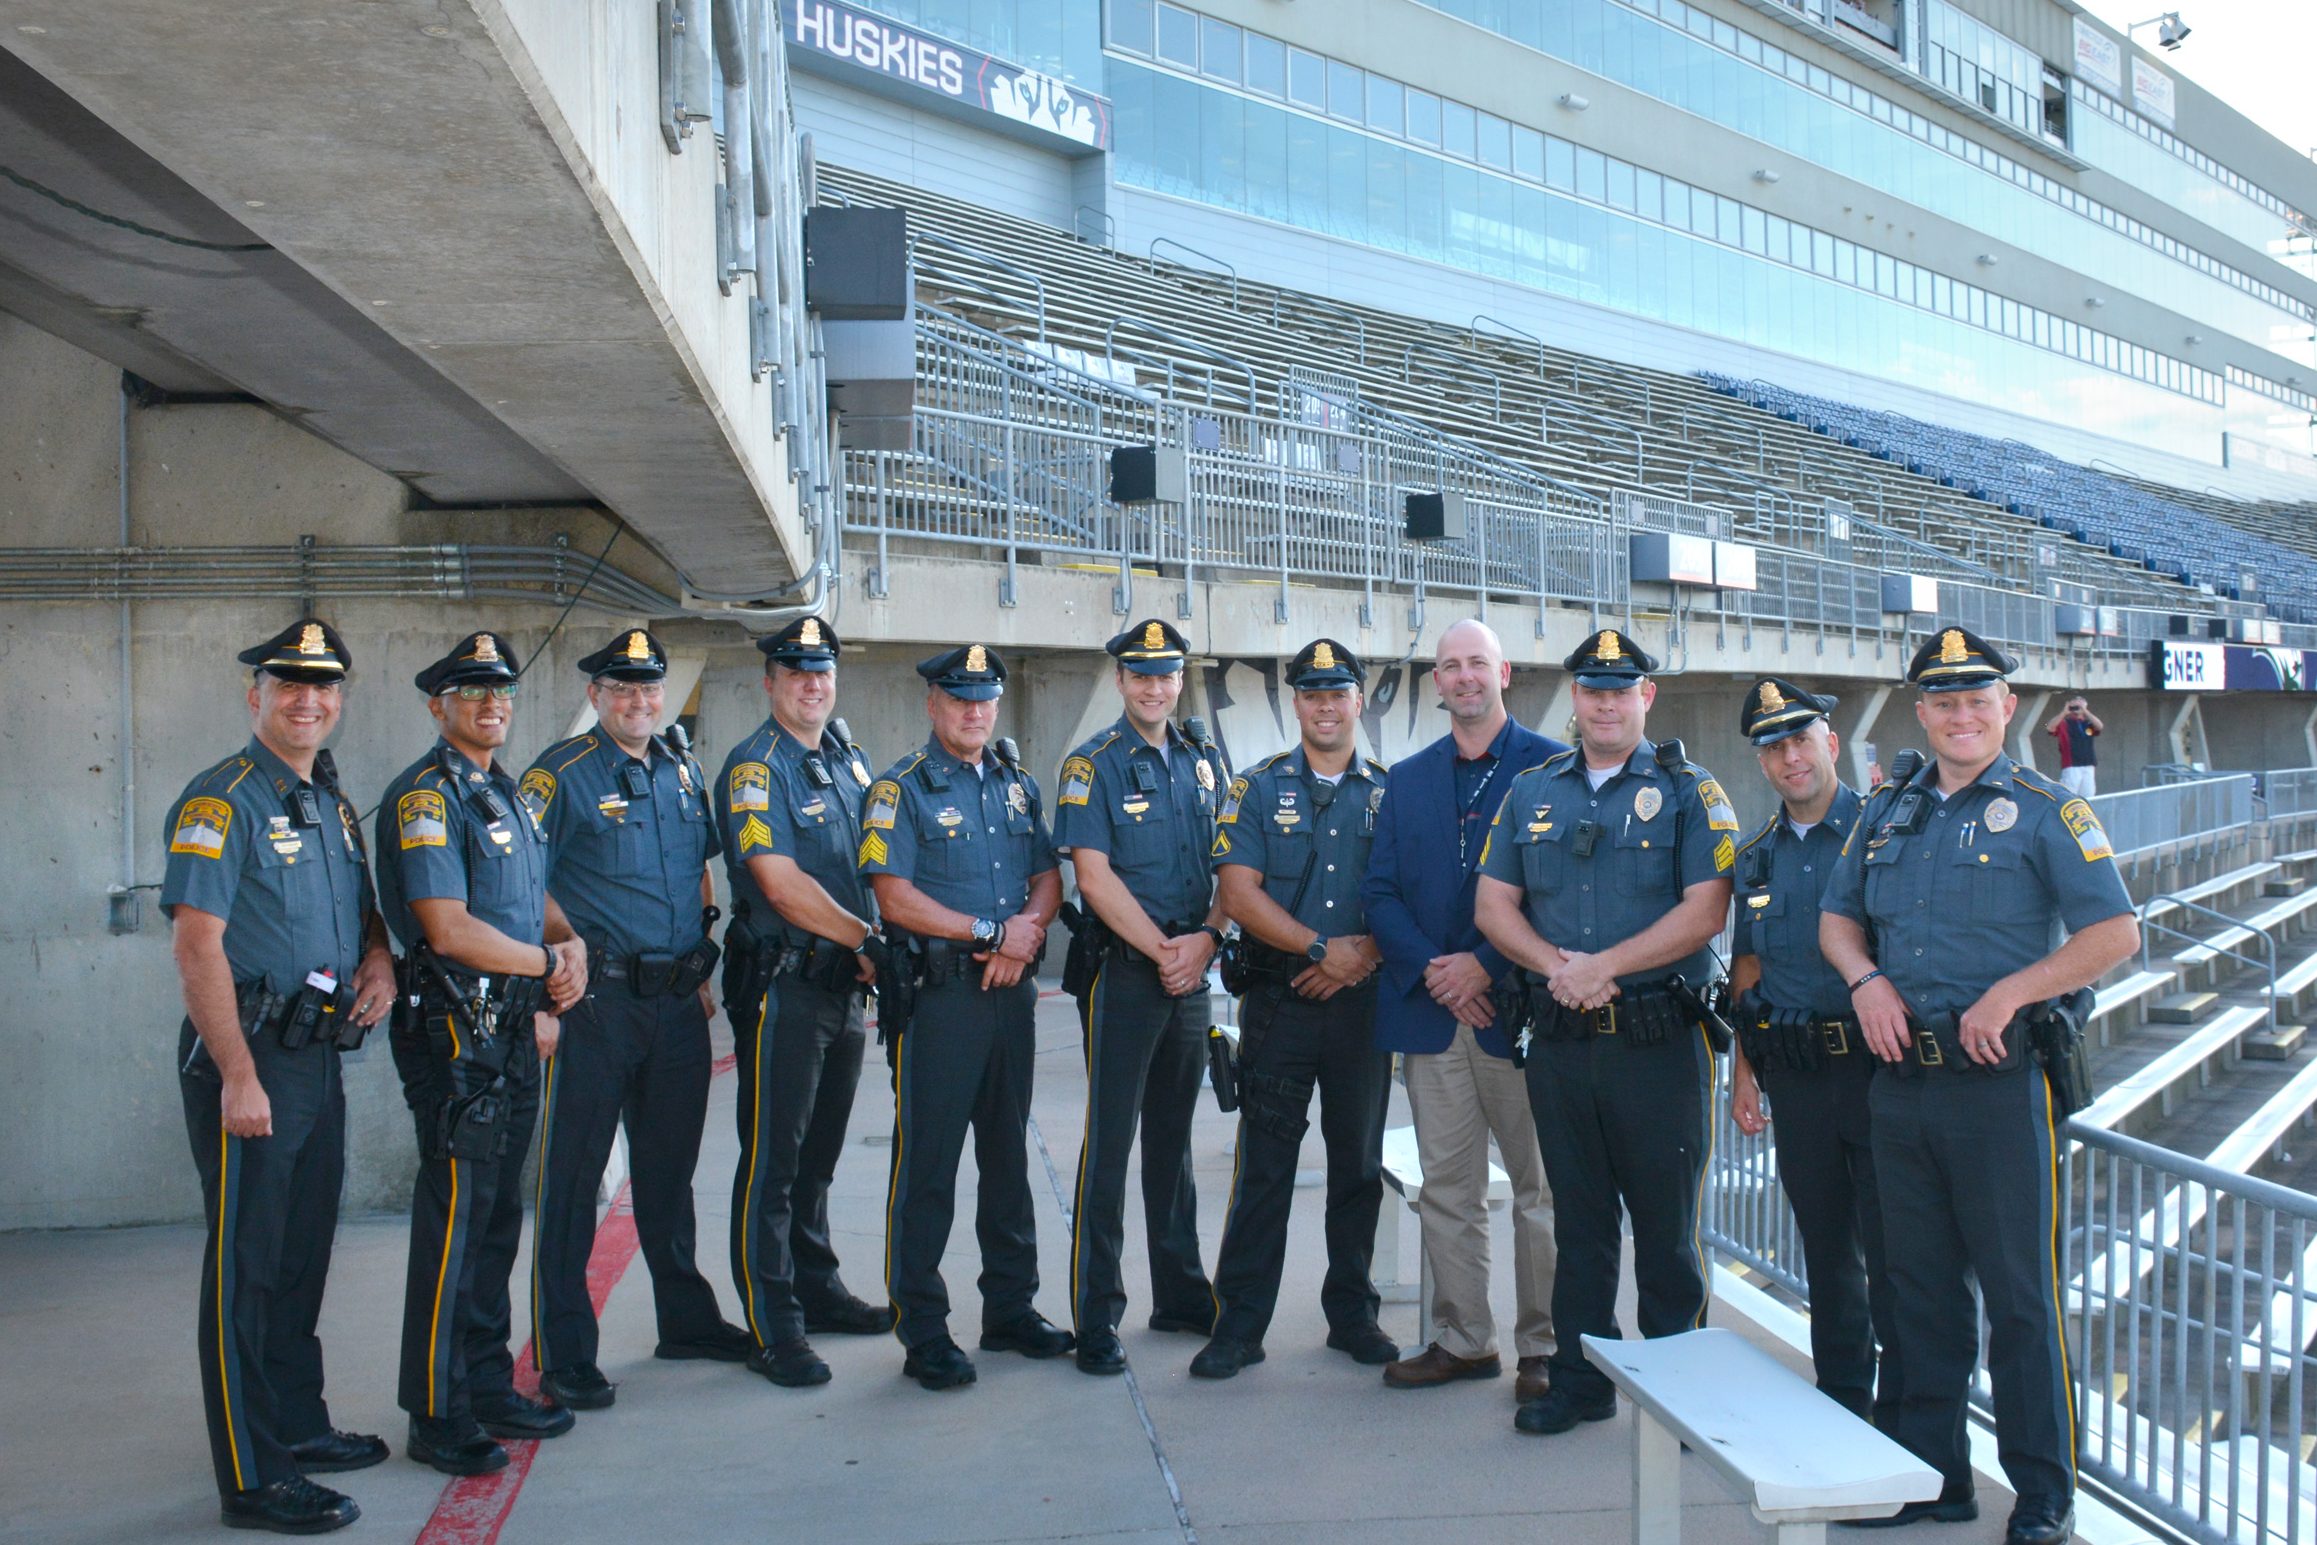 From left to right, Chief Hans D. Rhynhart ’93 and ’18; Officer Alex Rodriguez ’14; Sgt. Peter Harris ’03; Sgt. Justin Cheney ’07; Sgt. Marc Hanna ’88; Lt. Matthew C. Zadrowski ’07; Officer Tyler Hopson ’13; Lt. Darren Cook ’94; Sgt. Mark Bouthillier ’07; Deputy Chief Andrew Fournier ’95 ’01; Lt. Justin Gilbert ’06. UConn grads not pictured: Officer Robin Kiddy; Sgt. Zachary Ladyga; Officer Joseph Conetta. (Submitted Photo)